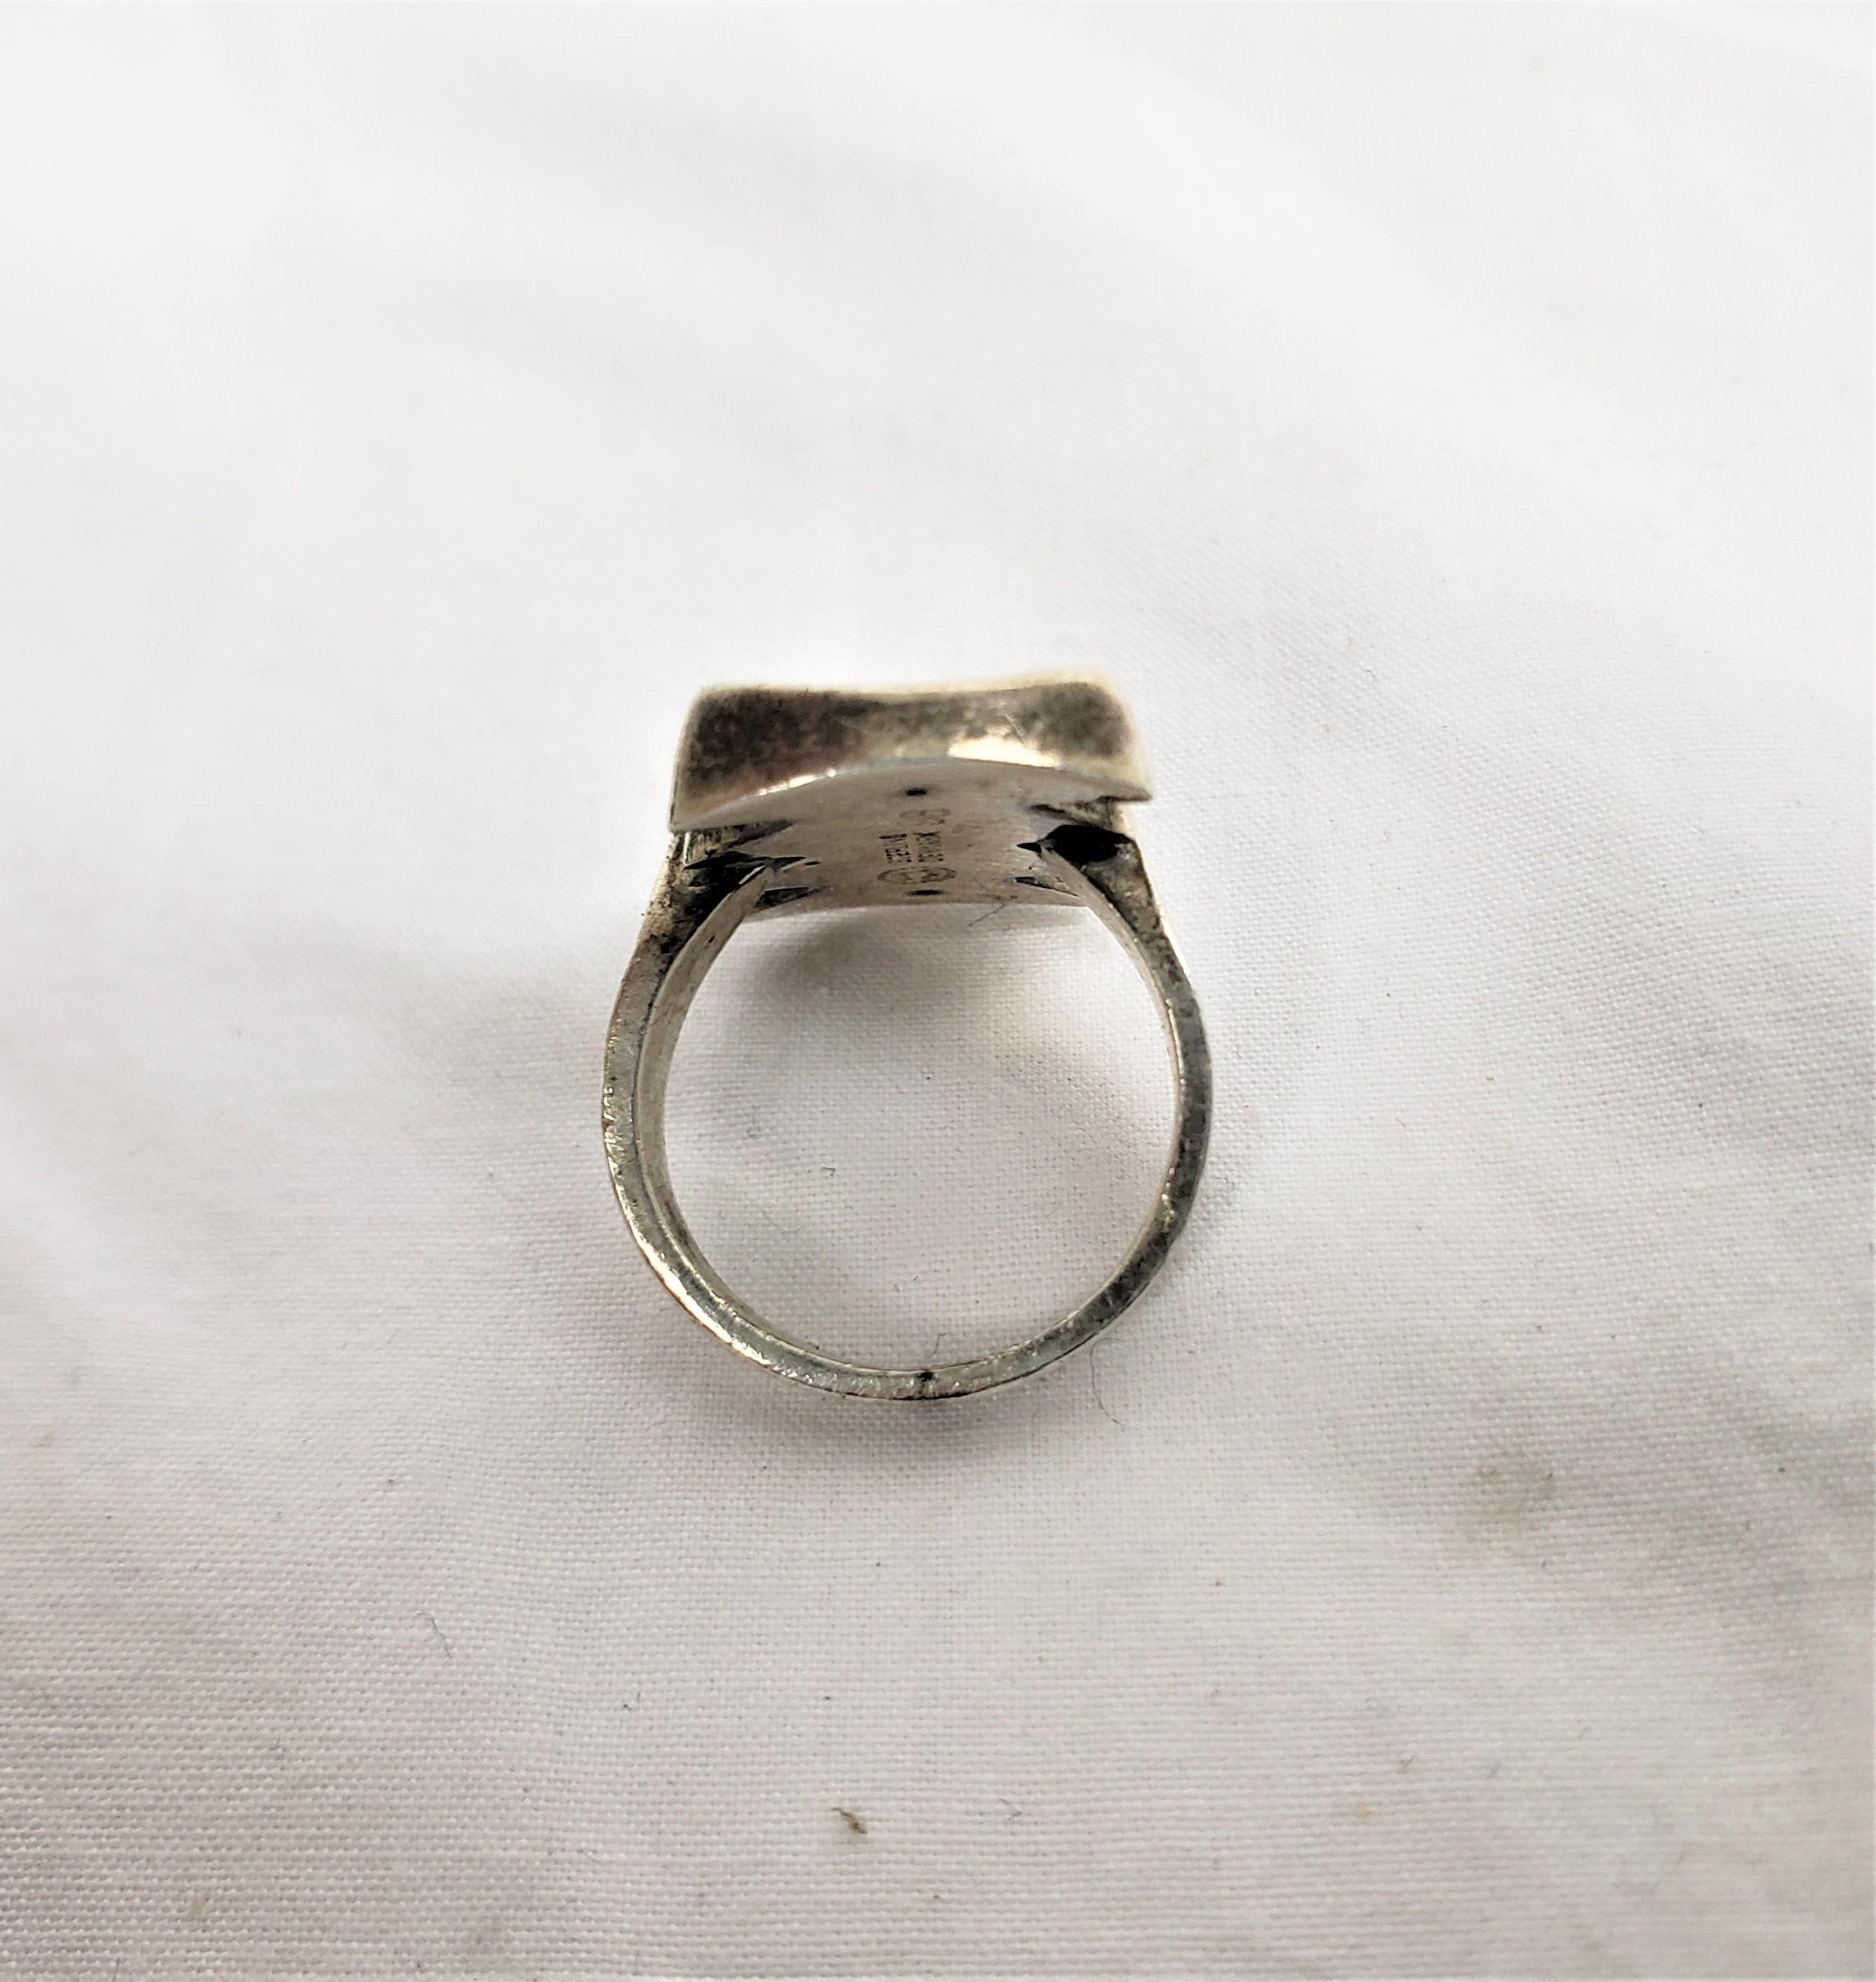 Antique Georg Jensen Ladies Sterling Silver Ring with a Geometric Design In Good Condition For Sale In Hamilton, Ontario